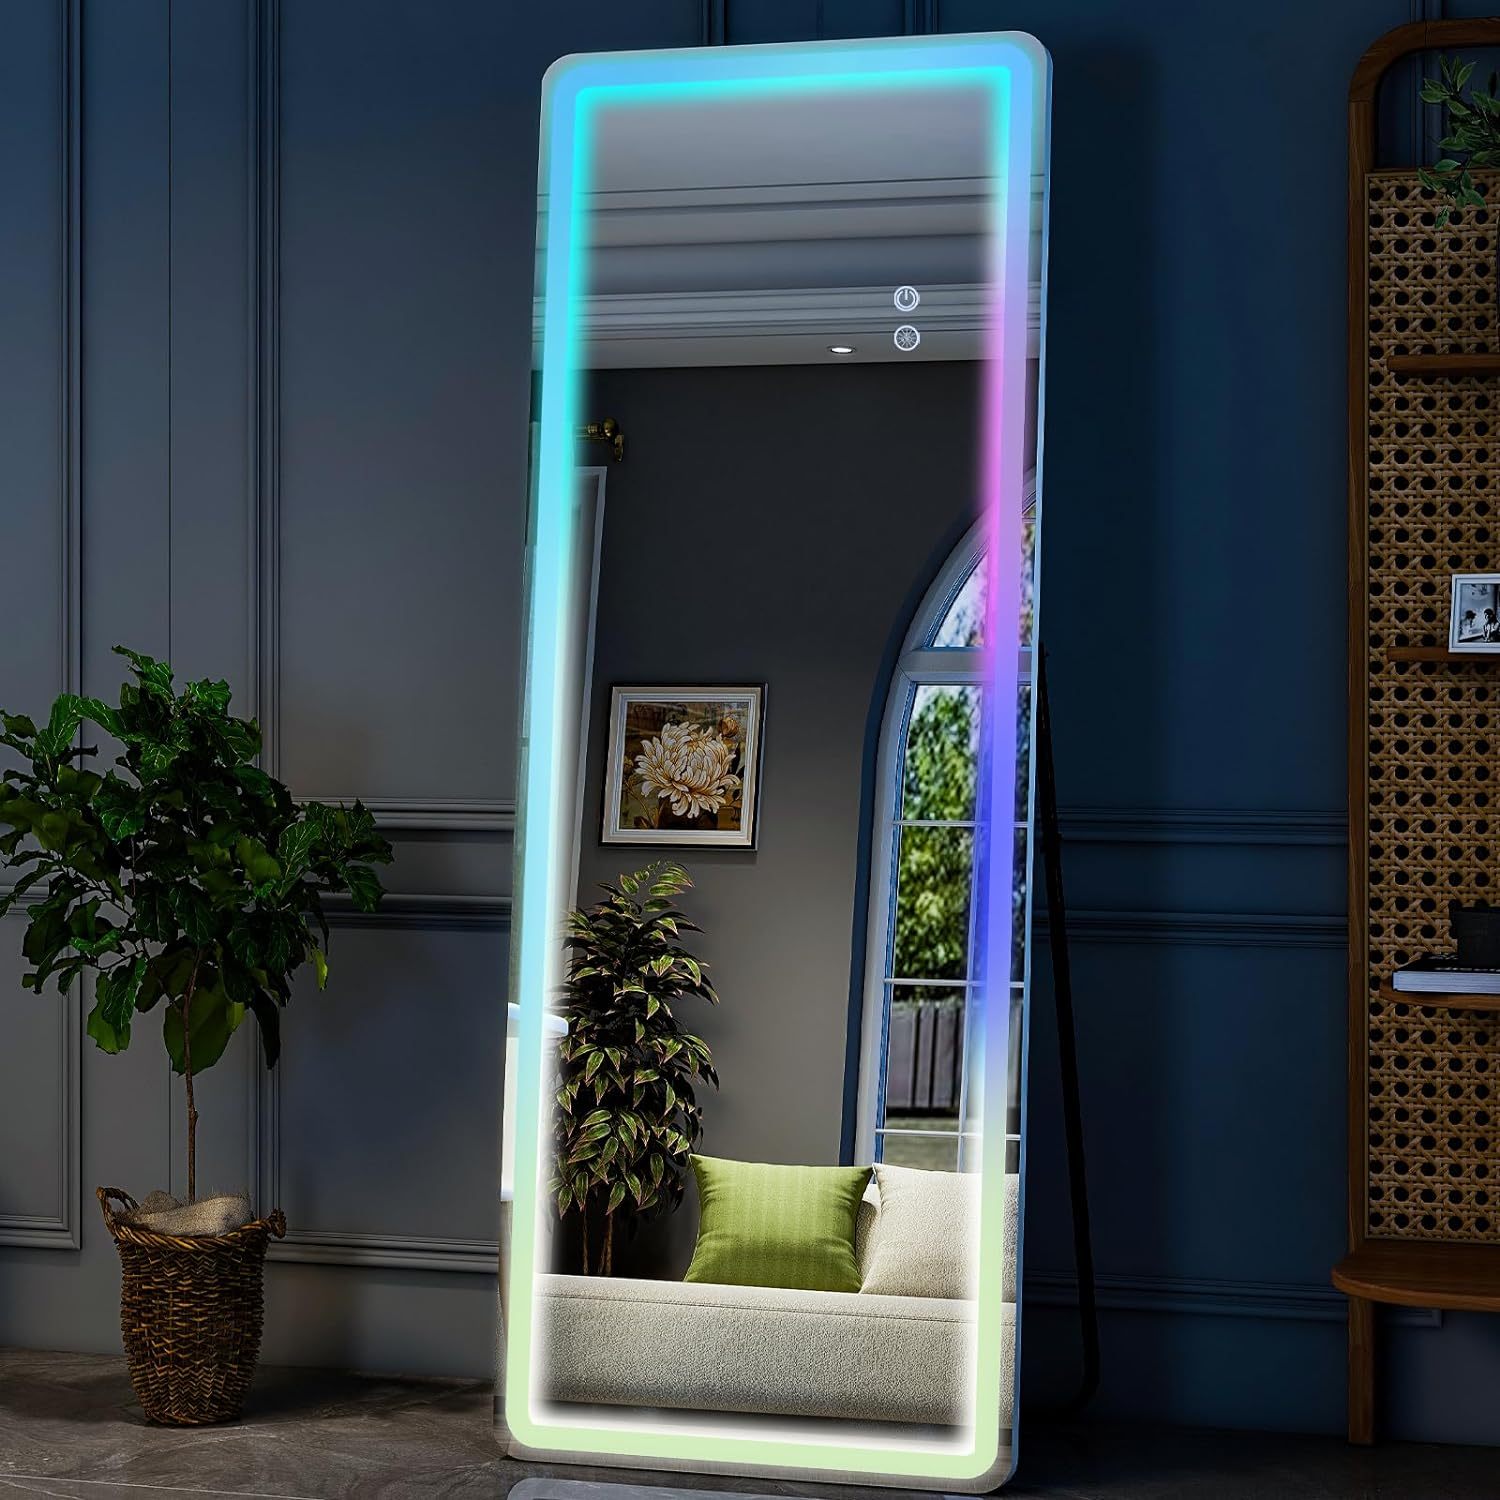 

Rounded Led Full Length Mirror Rgb Full Length Mirror Body Mirror With Lights Aluminum Frame Led Mirror With 7 Color Dimmable Lighting For Bedroom Living Room Bathroom, White